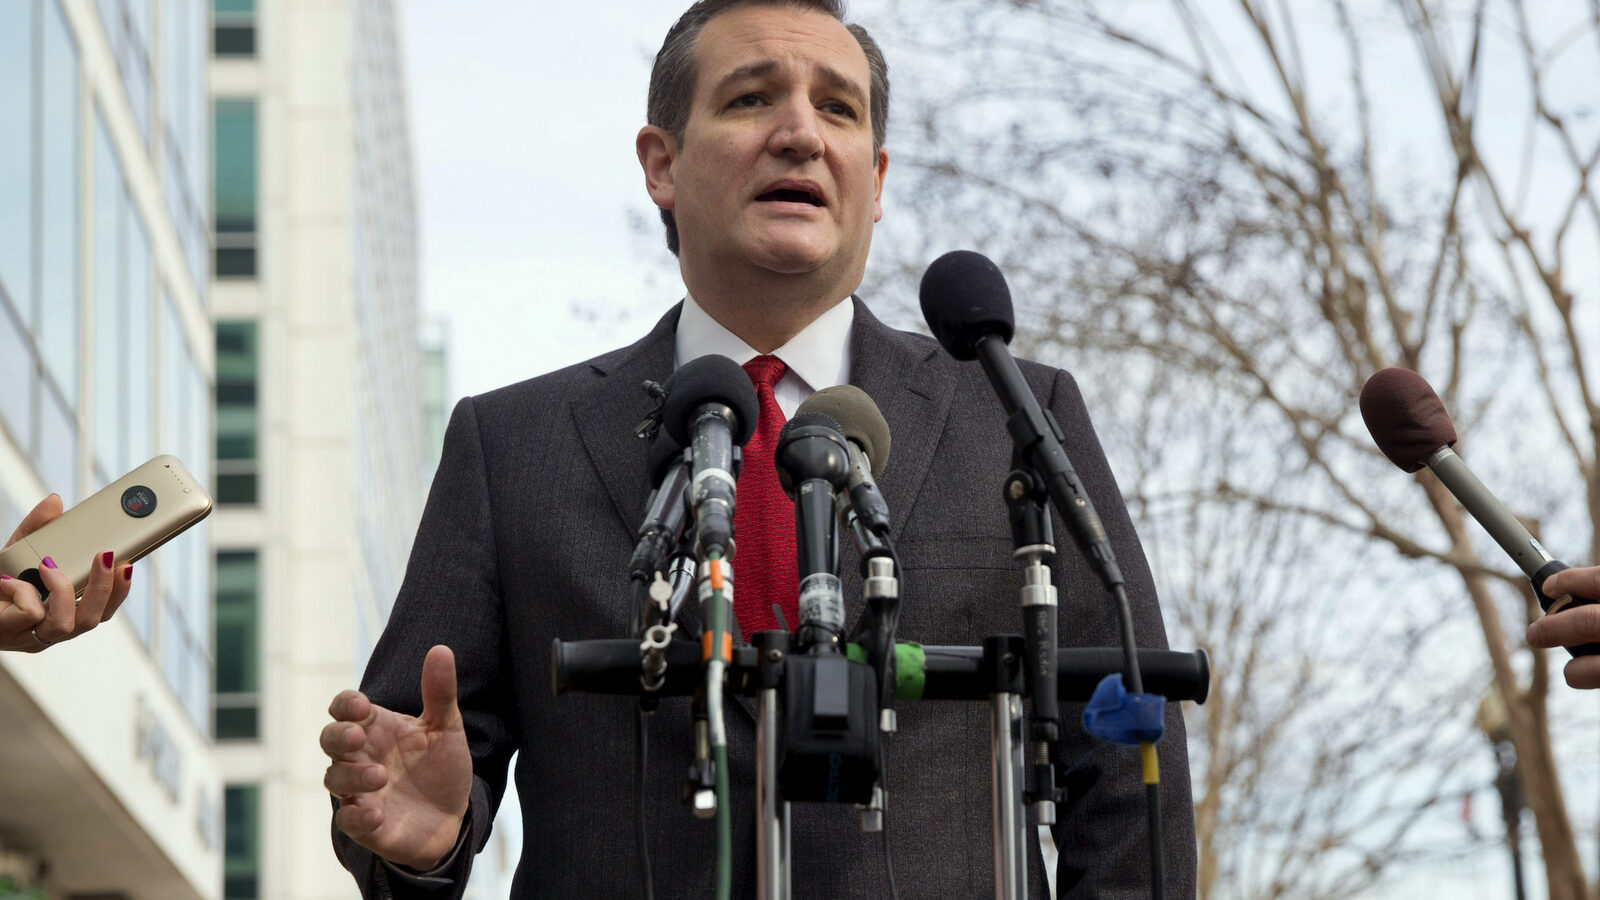 Republican presidential candidate, Sen. Ted Cruz, R-Texas speaks to the media about events in Brussels, Tuesday, March 22, 2016, near the Capitol in Washington. Cruz said he would use the "full force and fury" of the U.S. military to defeat the Islamic State group. (AP/Jacquelyn Martin)